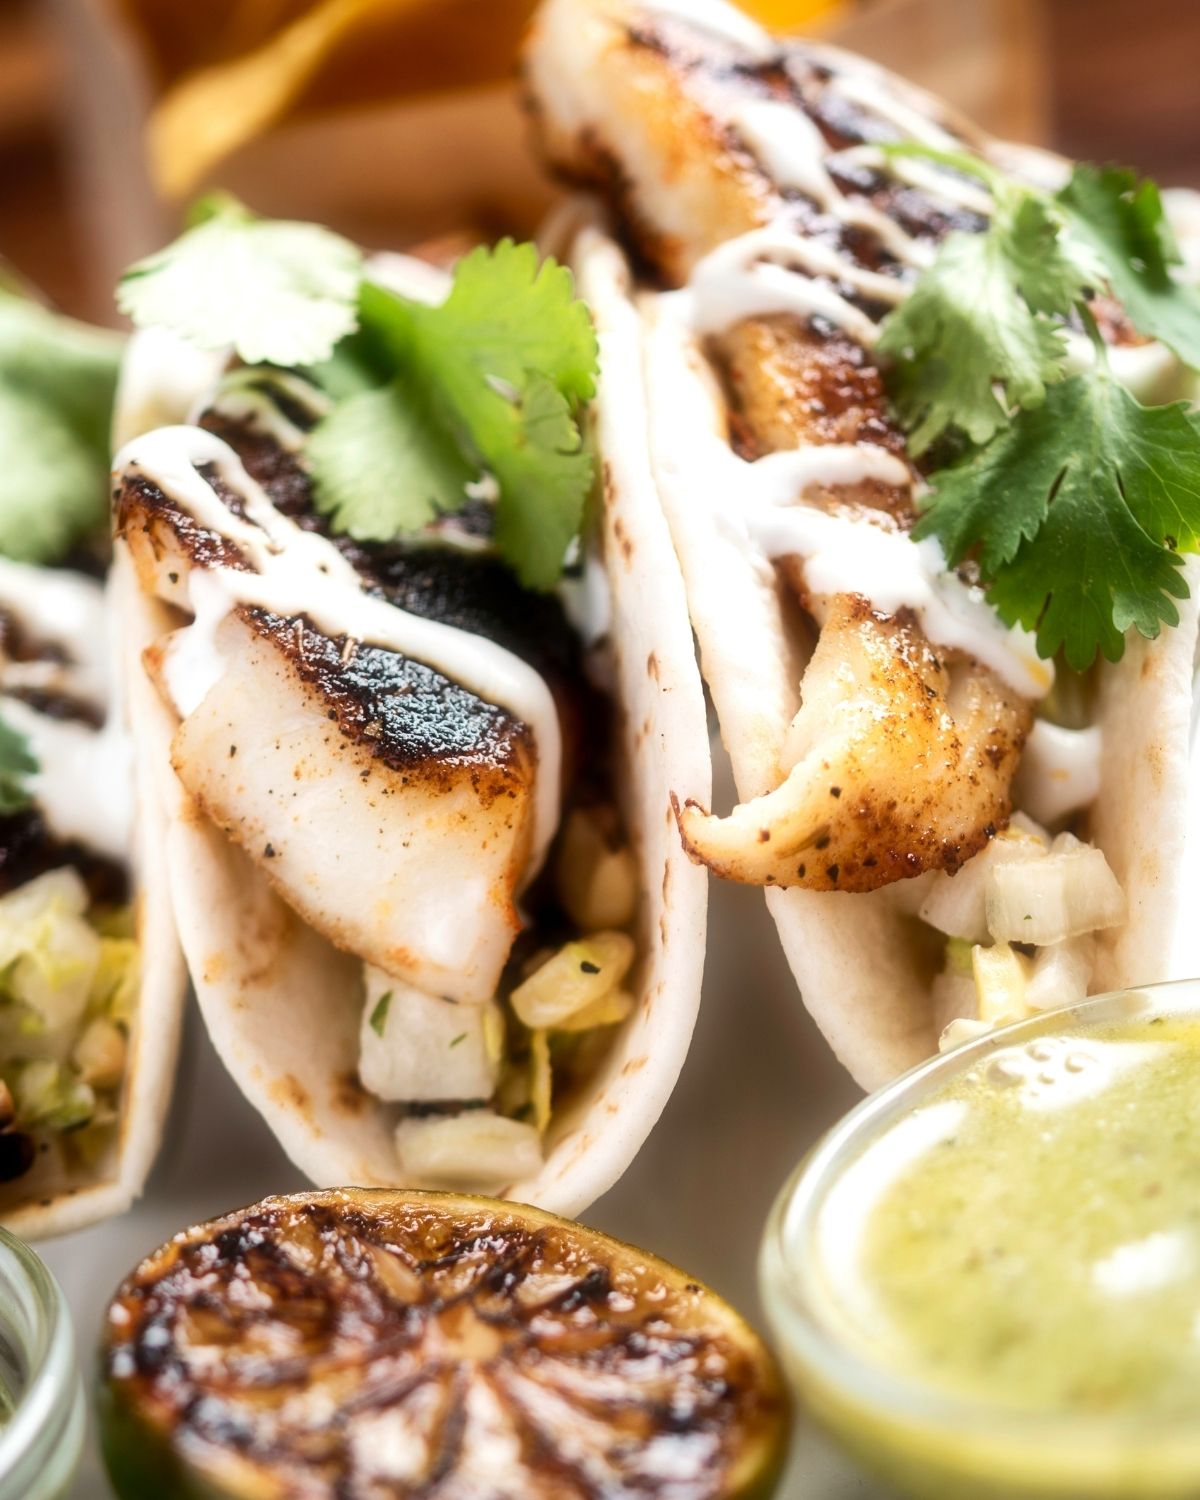 A close up on the fish tacos.